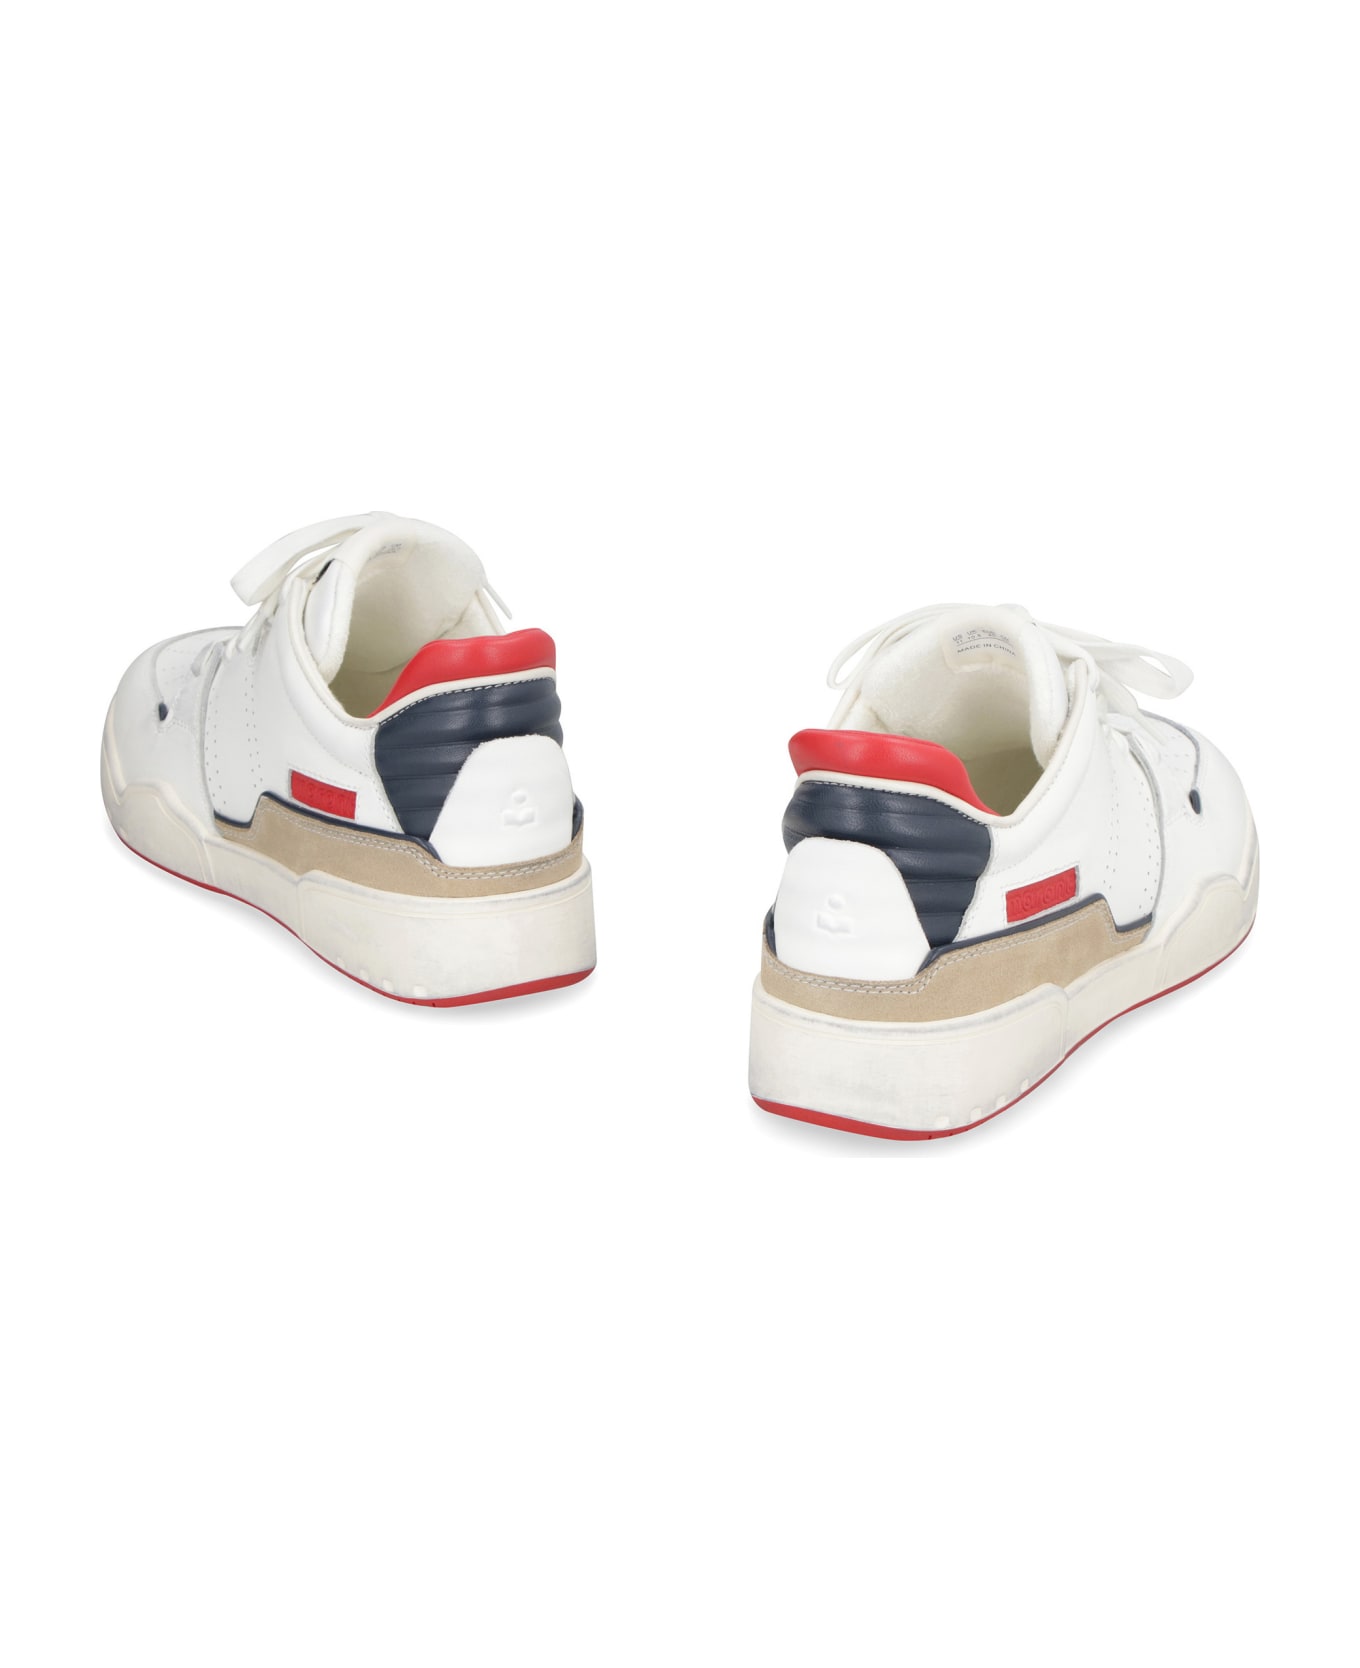 Isabel Marant Emreeh Leather Low-top Sneakers - White スニーカー